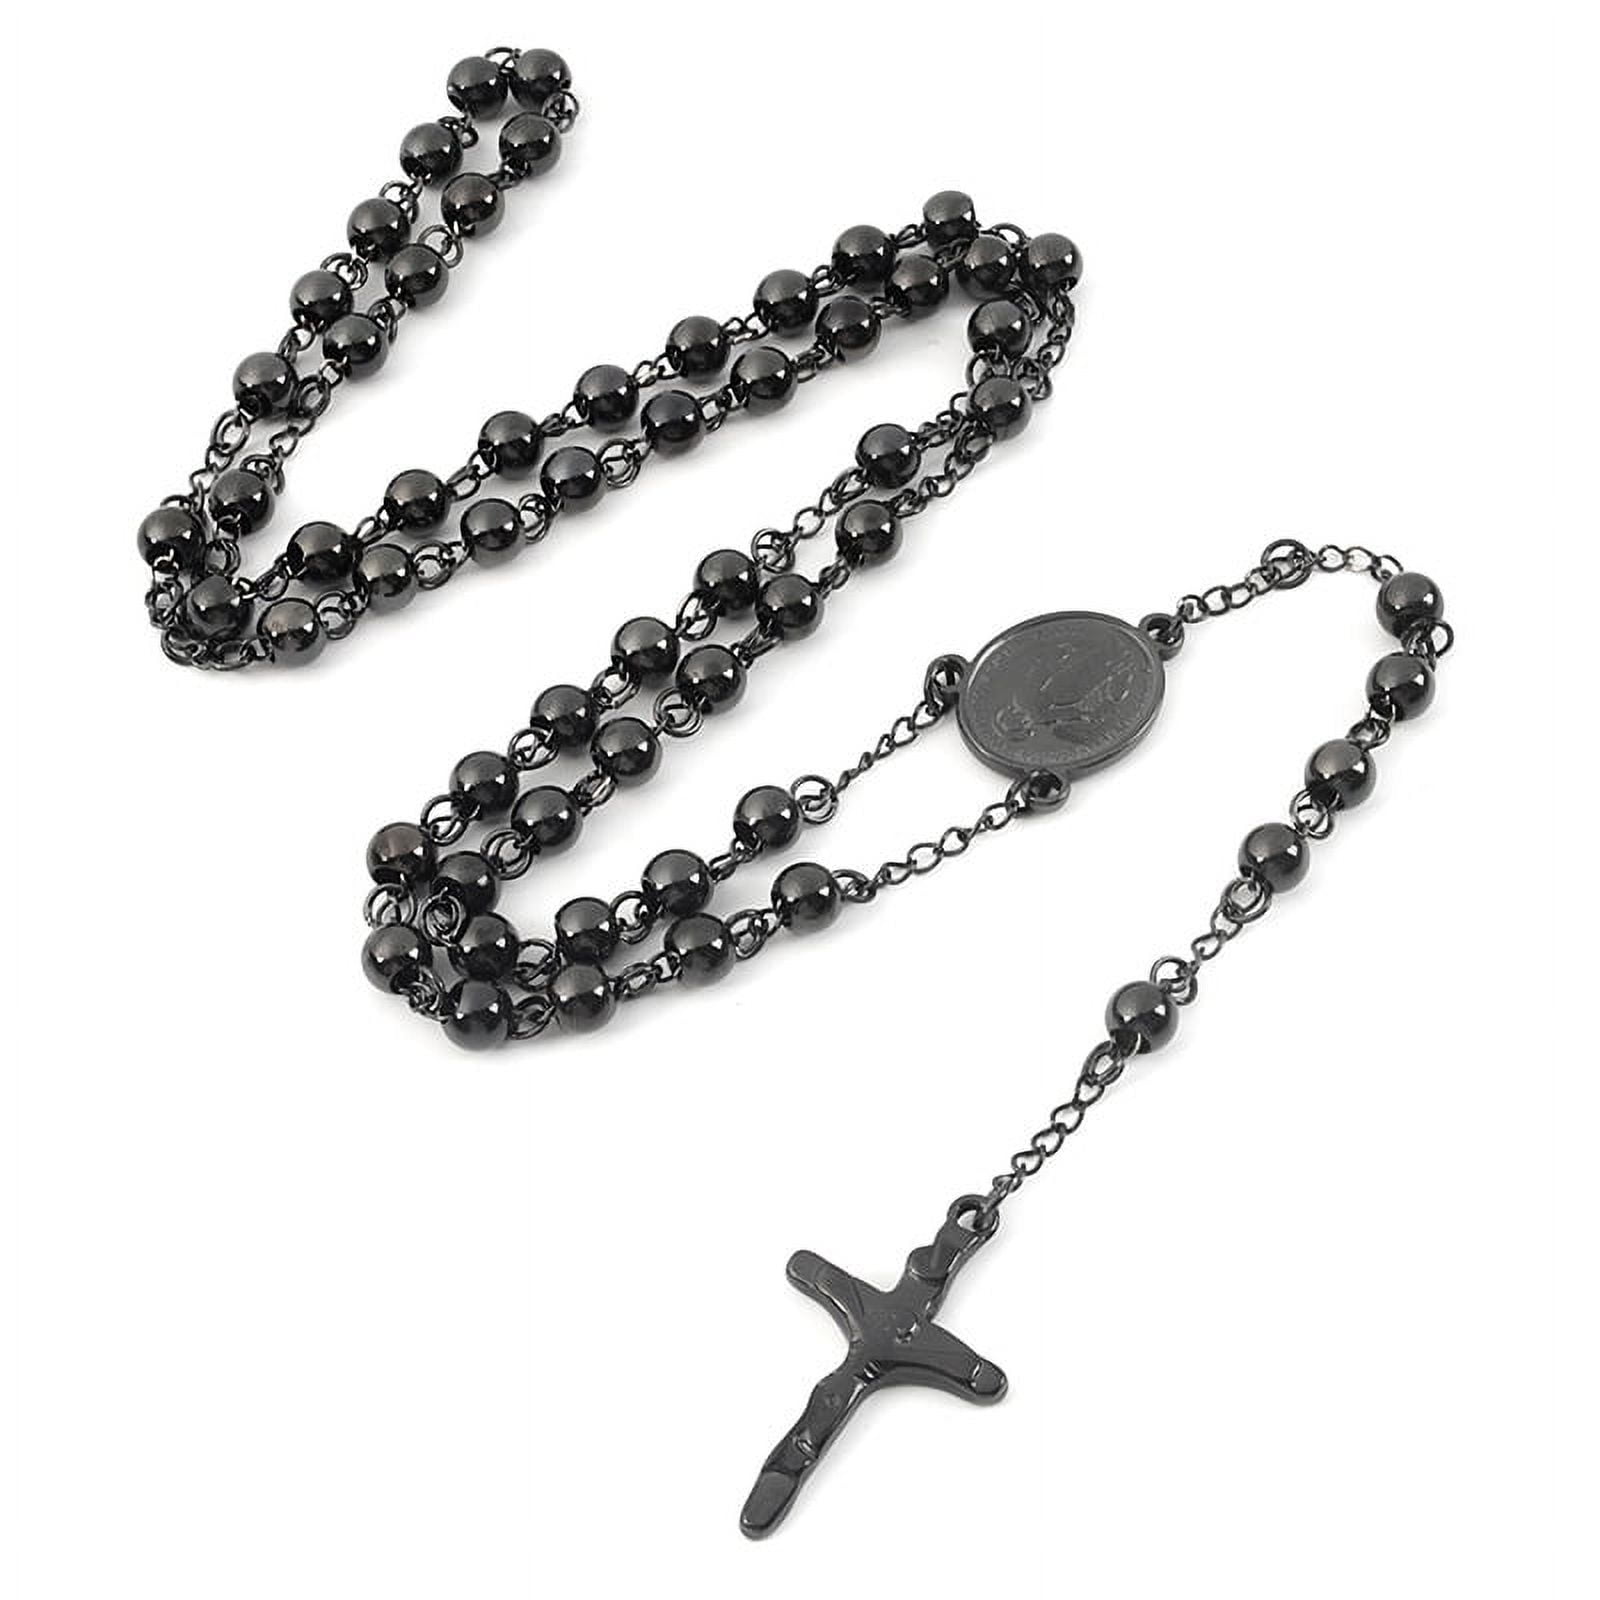 Buy CResha Black Rosary Beads Jesus Cross Pendent Necklace for Men and  Women (Small - 6mm) at Amazon.in